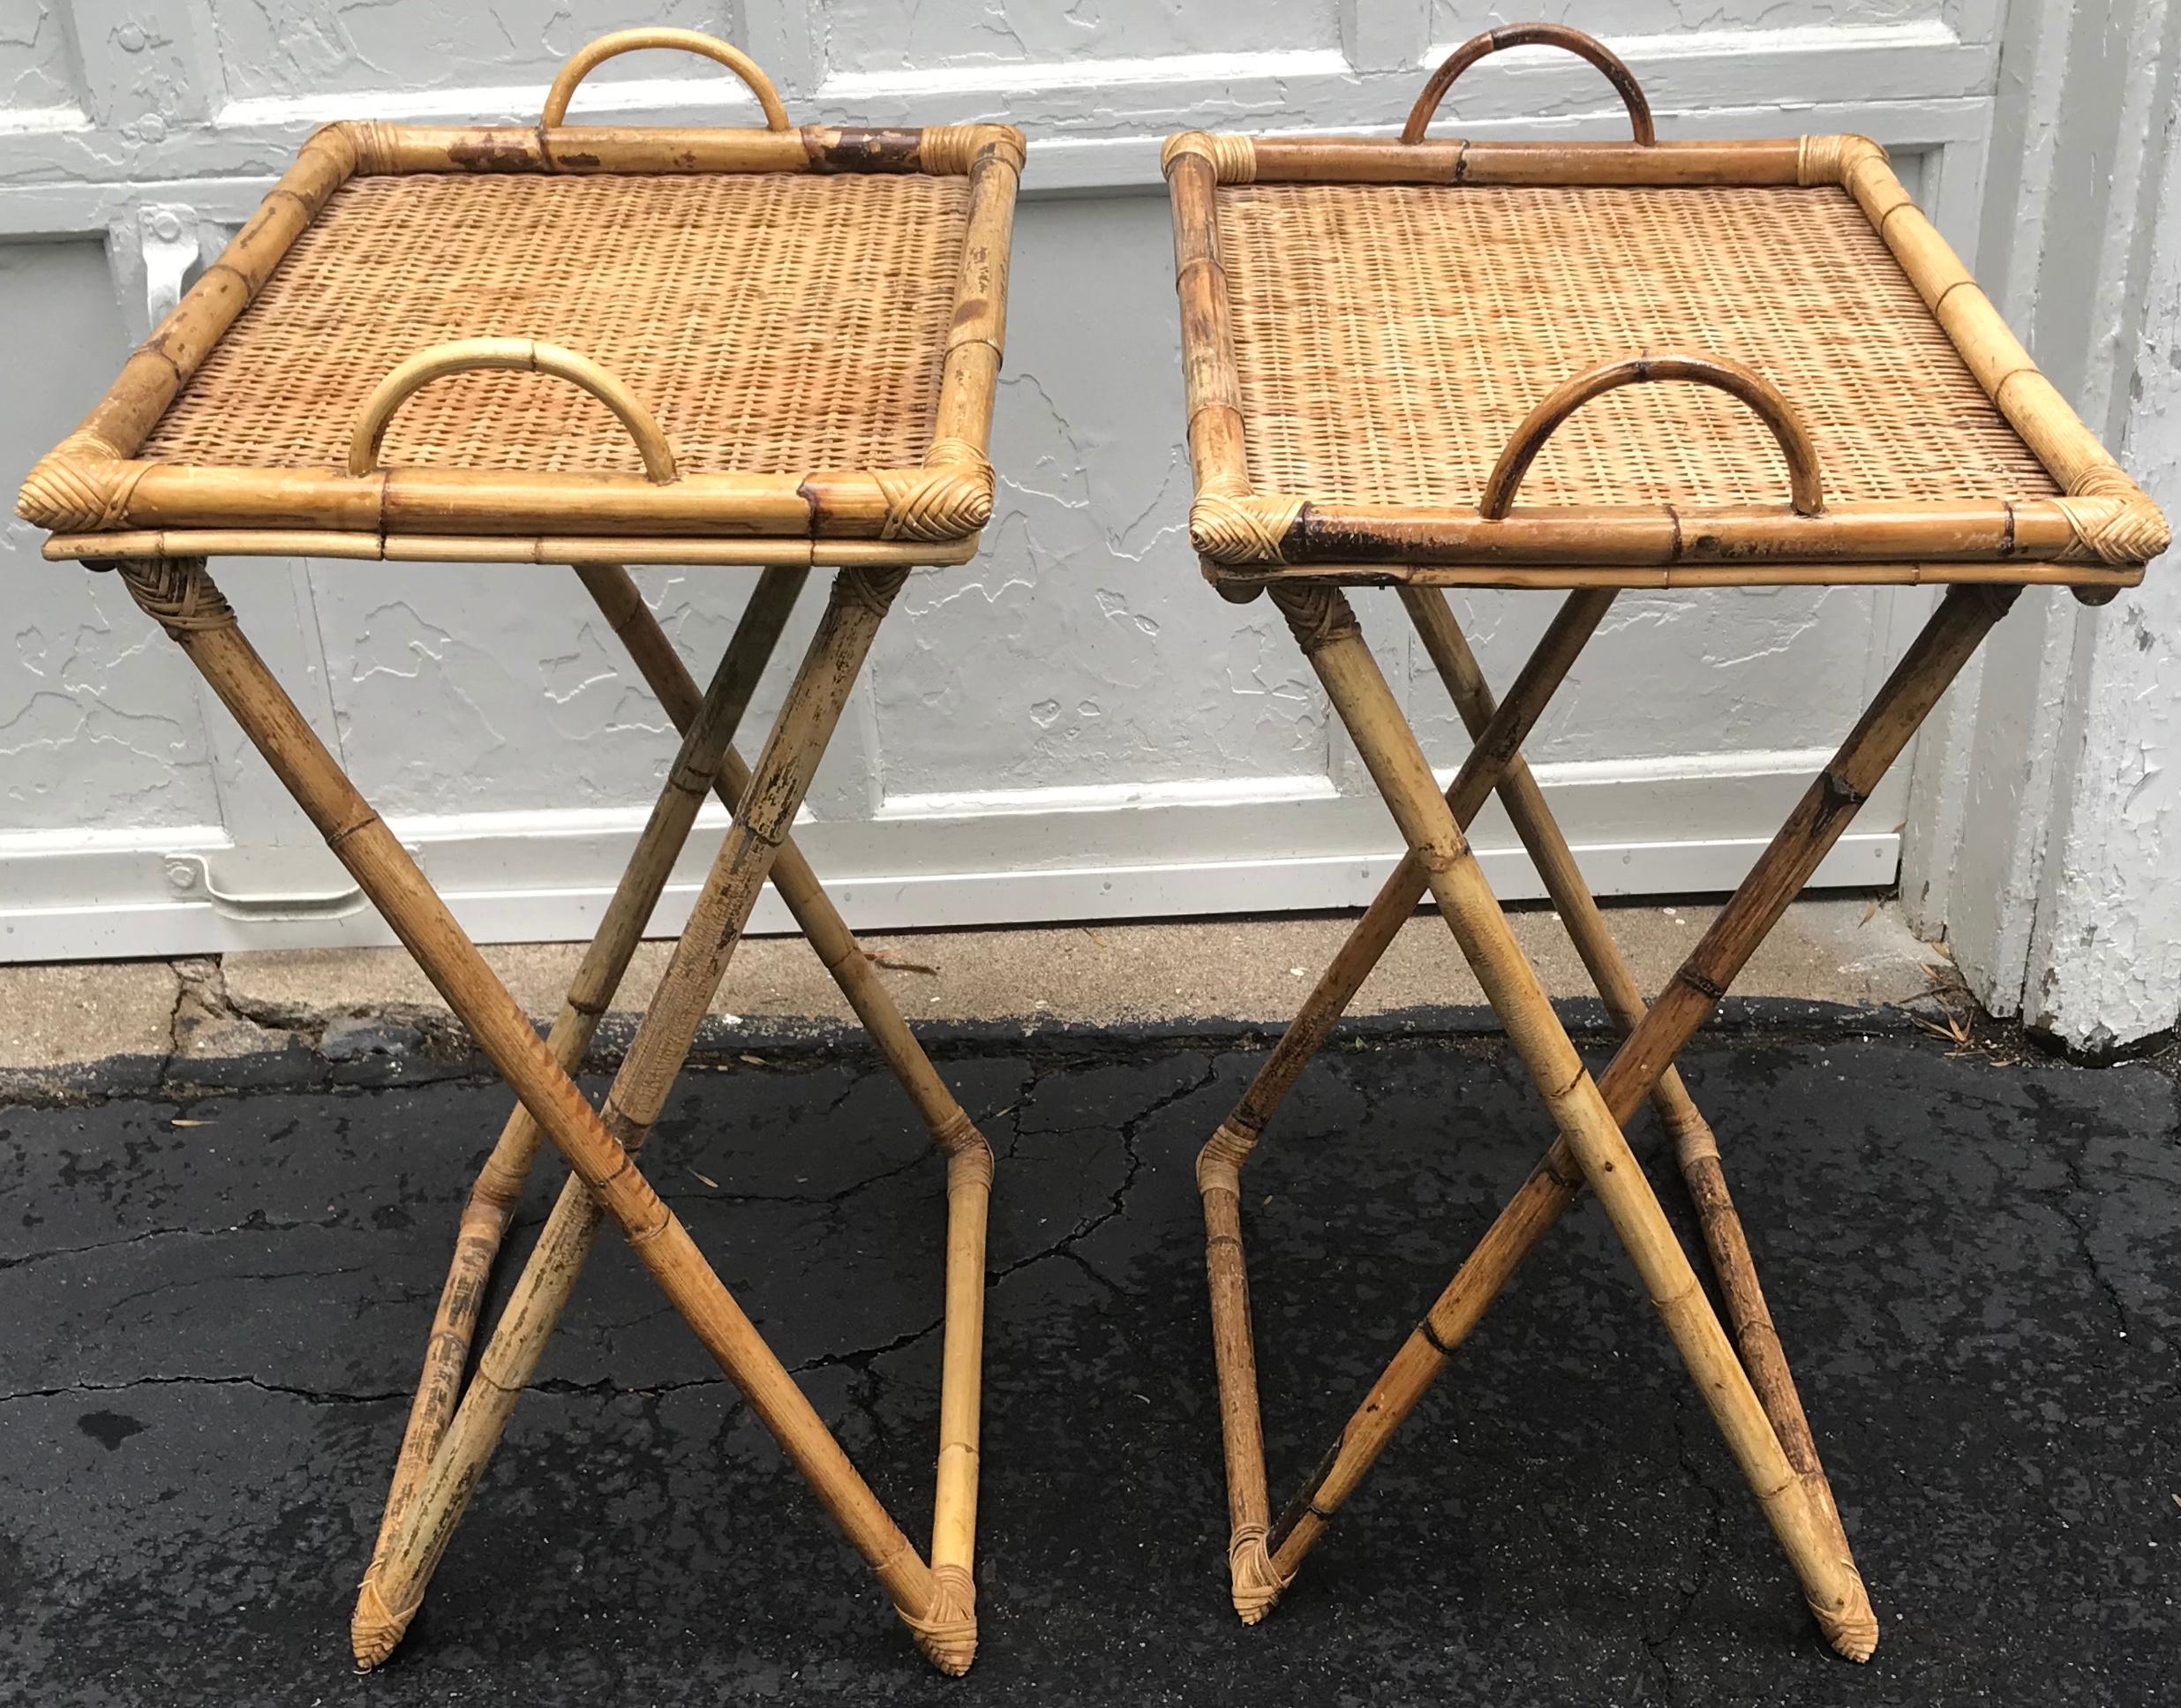 Pair of wicker and bamboo tray tables. Pair of vintage wicker and bamboo handled trays on collapsible stands perfect as bedside tables at the beach or chic dinners in front of the television. Stands fold up for convenient minimal storage with trays,